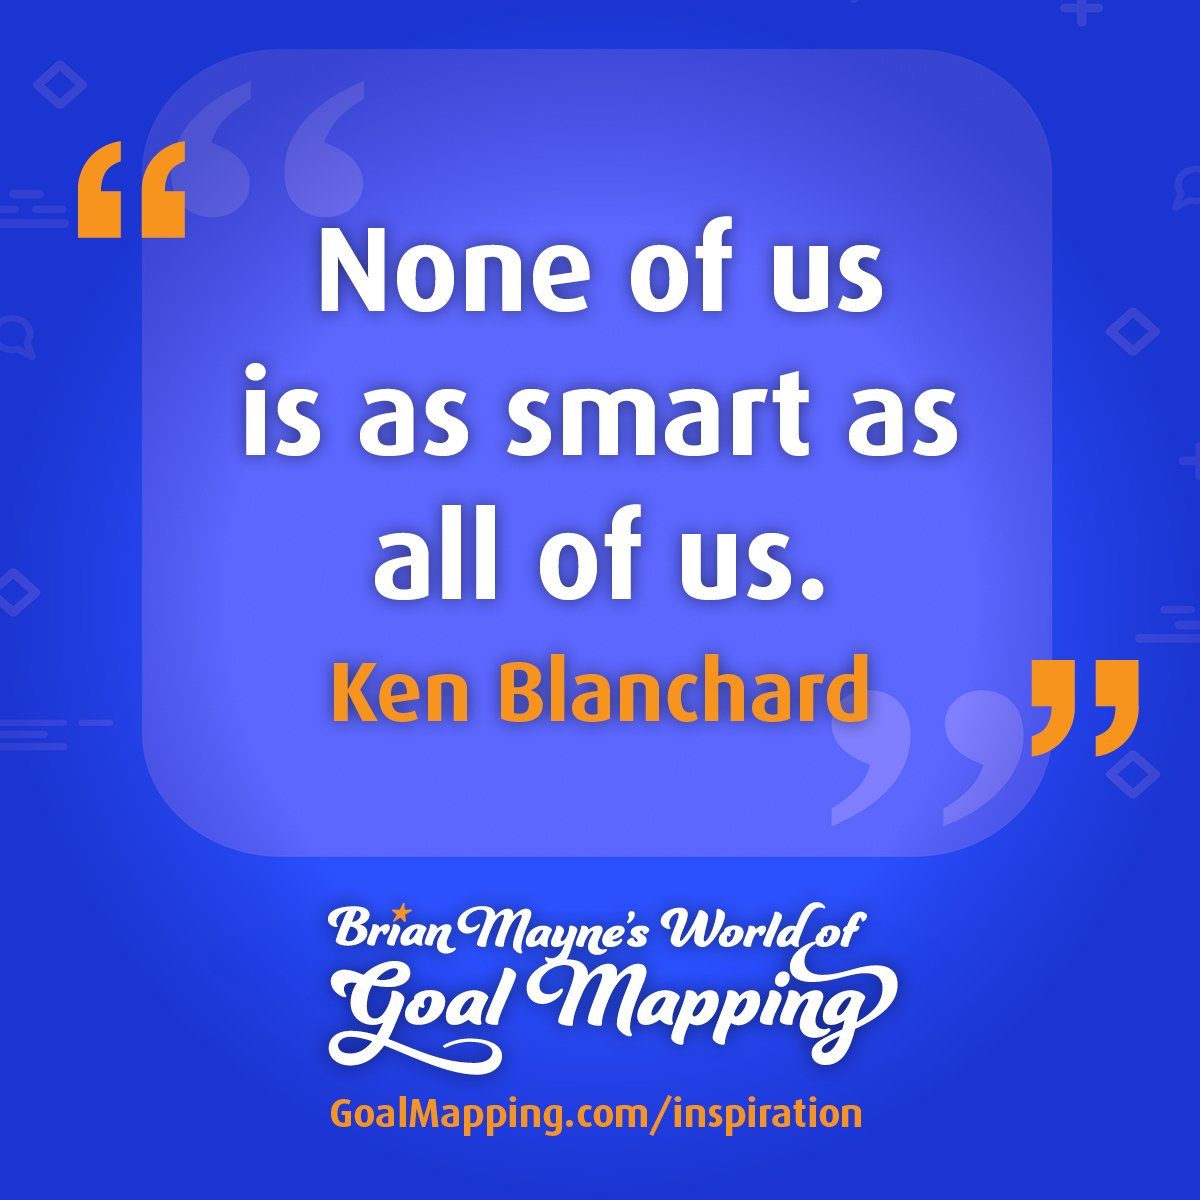 "None of us is as smart as all of us." Ken Blanchard